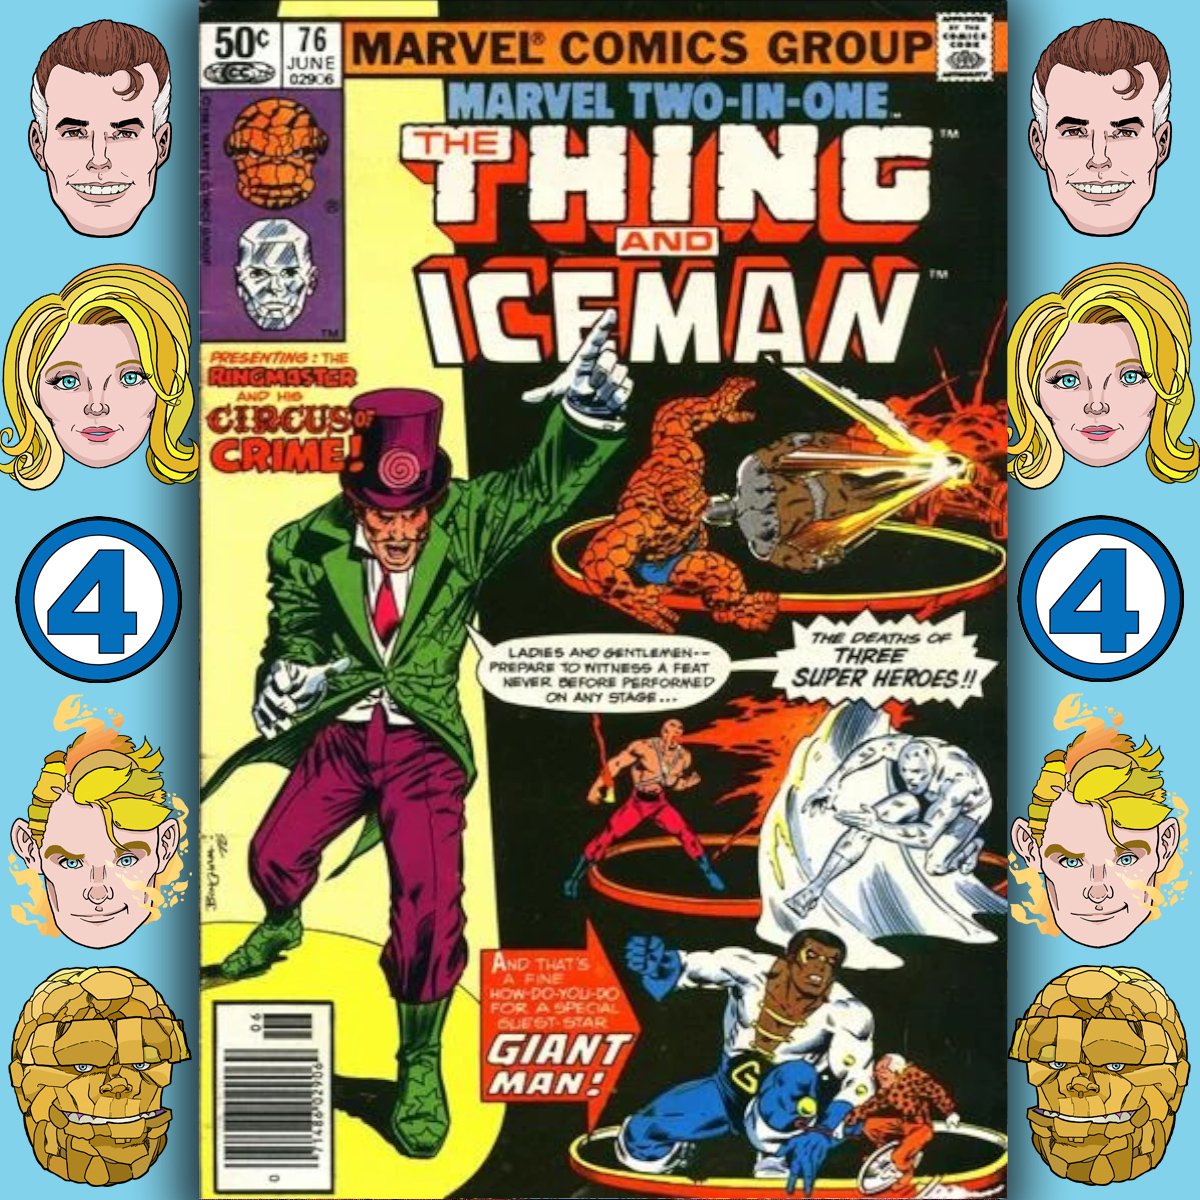 Marvel Two-In-One #39 (May, 1978) The Vision Gambit